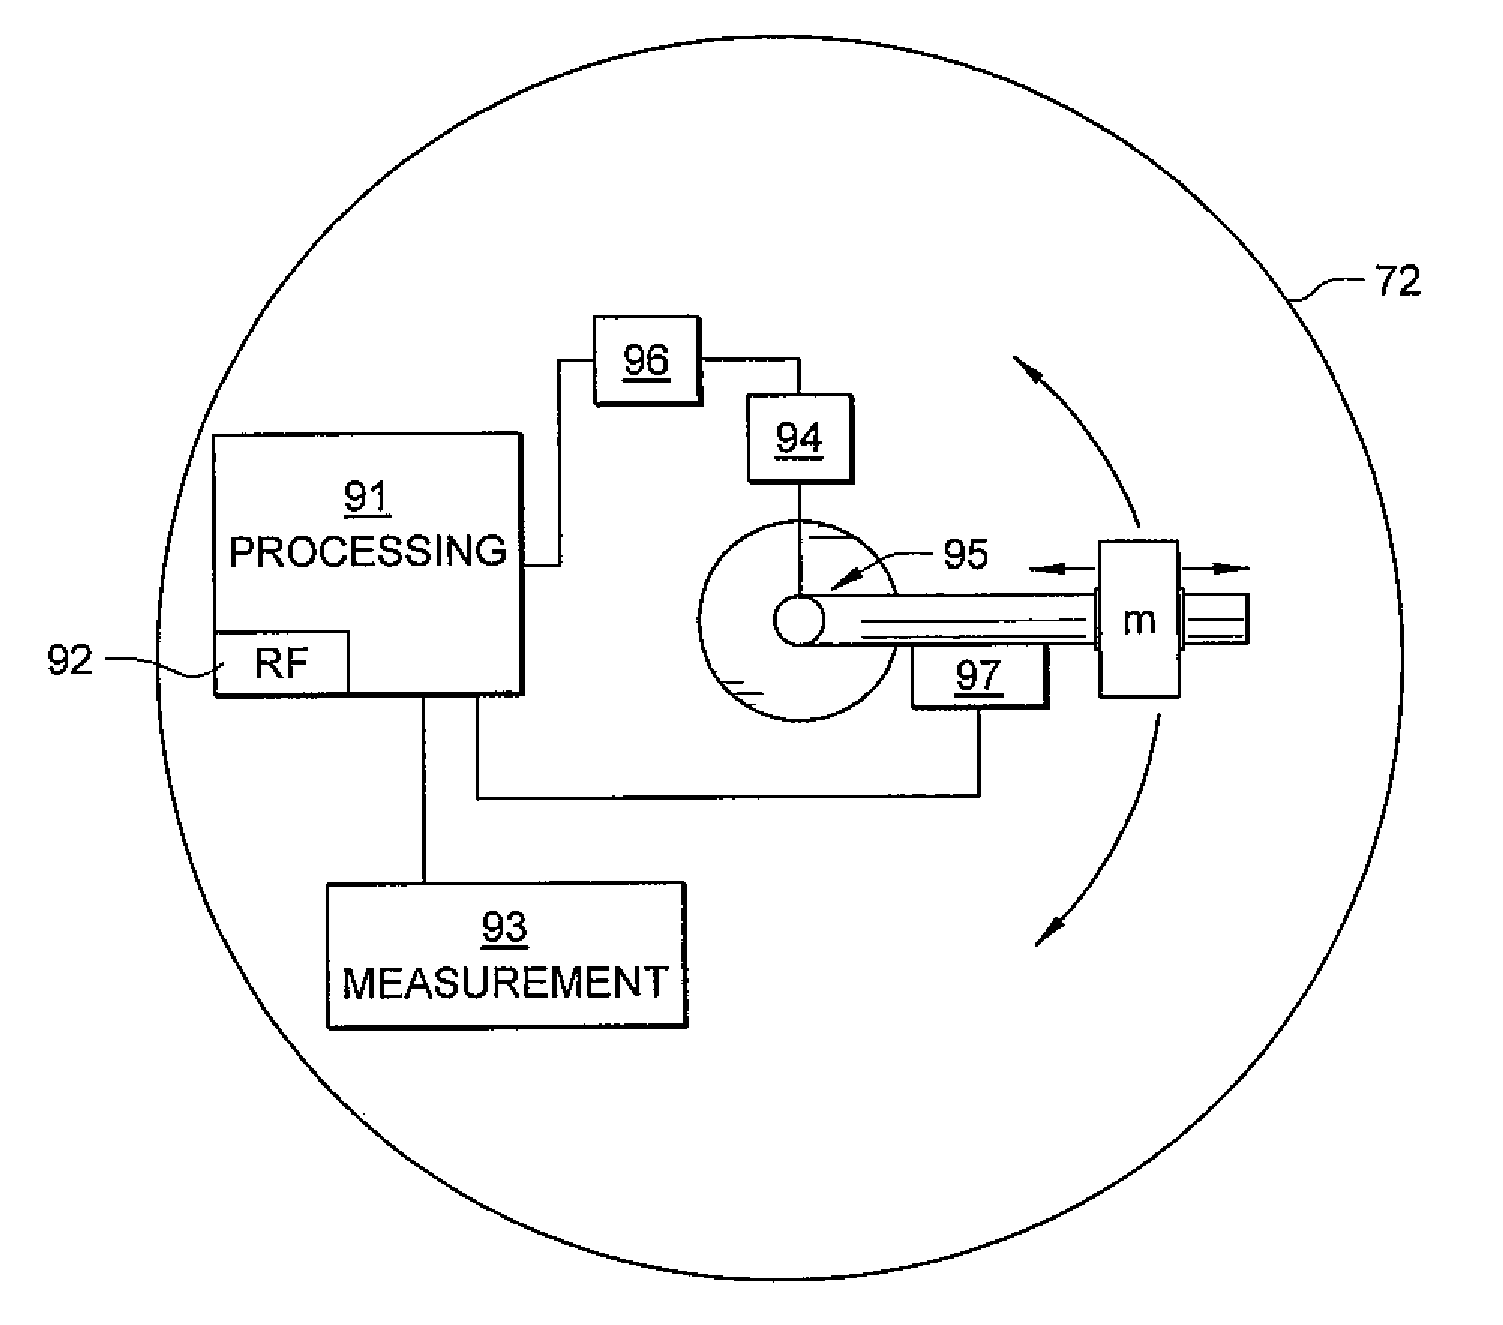 System and method for converting ocean wave energy into electricity